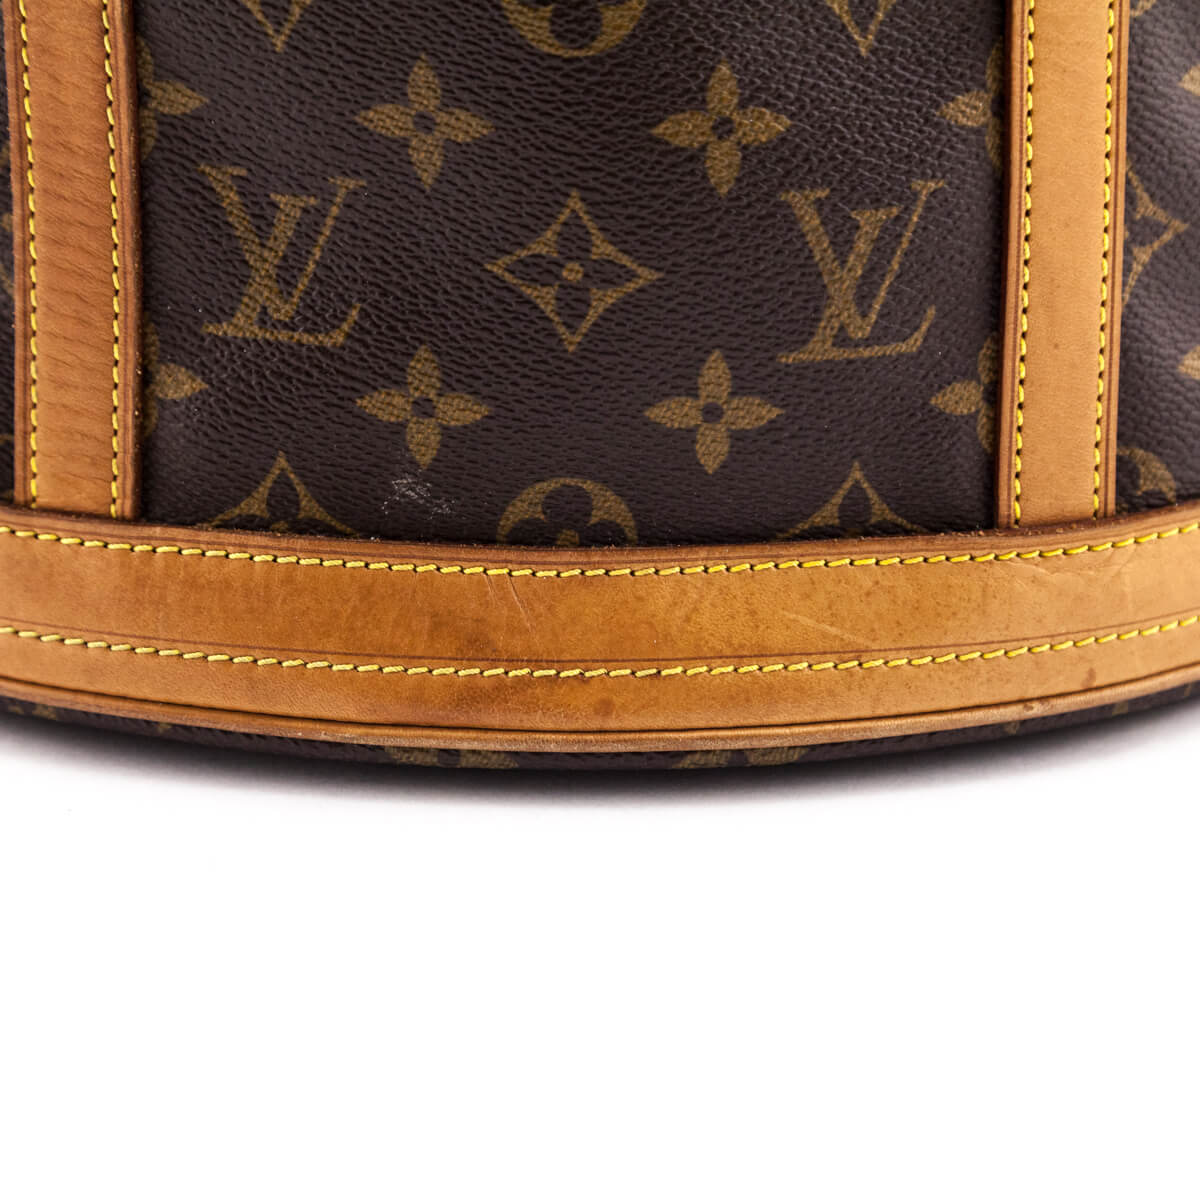 Buy Authentic Pre-owned Louis Vuitton Monogram Vintage Large Bucket Gm  Shoulder Tote Bag M42236 210142 from Japan - Buy authentic Plus exclusive  items from Japan